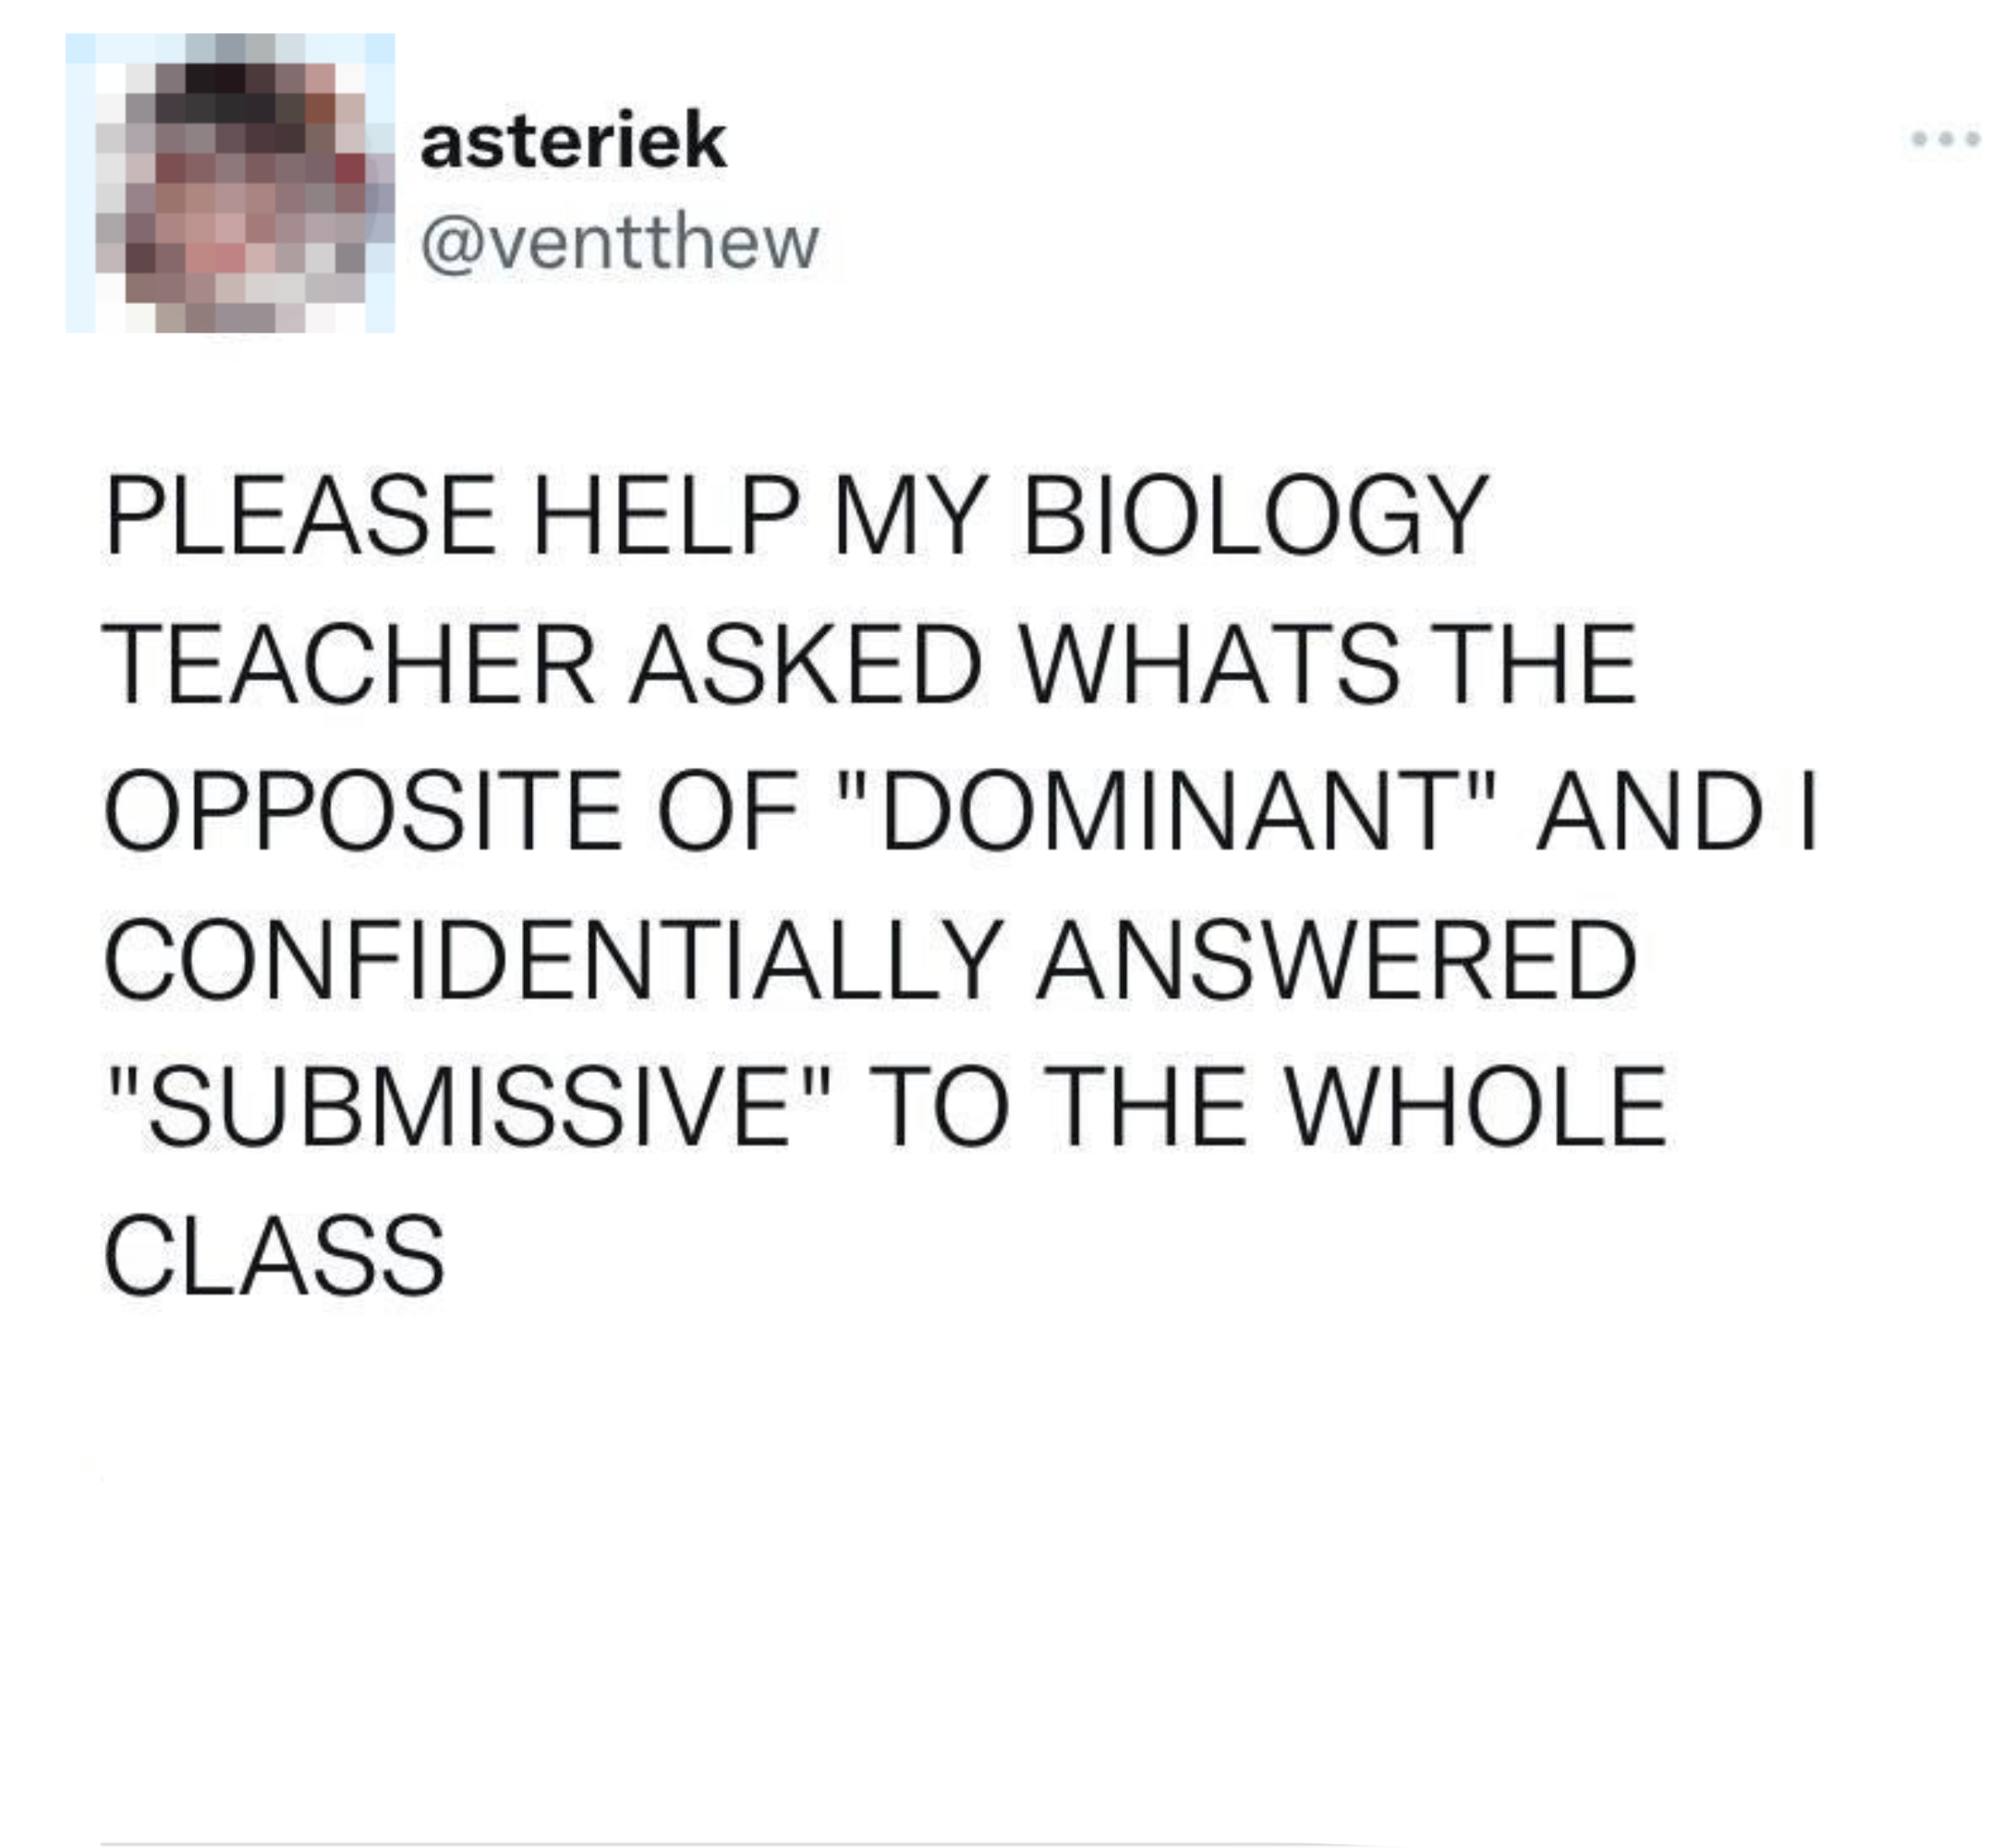 Tweet by user &#x27;asteriek&#x27; asking for help after answering &#x27;submissive&#x27; to what&#x27;s opposite of &#x27;dominant&#x27; in biology class; tweet has viral engagement